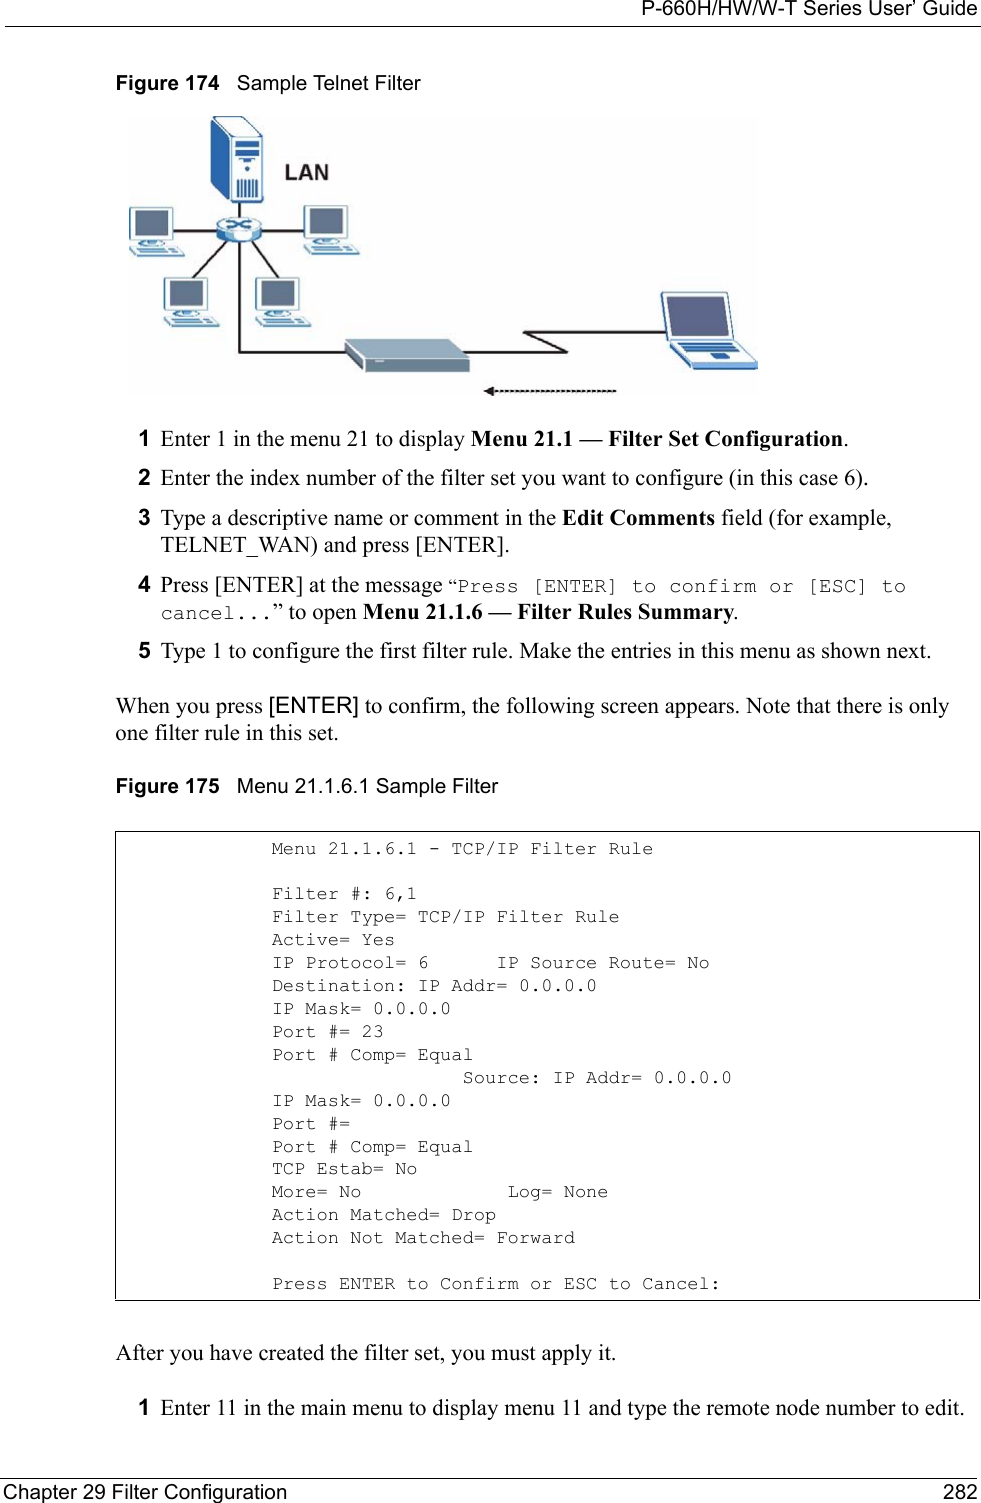 P-660H/HW/W-T Series User’ GuideChapter 29 Filter Configuration 282Figure 174   Sample Telnet Filter1Enter 1 in the menu 21 to display Menu 21.1 — Filter Set Configuration.2Enter the index number of the filter set you want to configure (in this case 6).3Type a descriptive name or comment in the Edit Comments field (for example, TELNET_WAN) and press [ENTER].4Press [ENTER] at the message “Press [ENTER] to confirm or [ESC] to cancel...” to open Menu 21.1.6 — Filter Rules Summary.5Type 1 to configure the first filter rule. Make the entries in this menu as shown next.When you press [ENTER] to confirm, the following screen appears. Note that there is only one filter rule in this set.Figure 175   Menu 21.1.6.1 Sample Filter After you have created the filter set, you must apply it.1Enter 11 in the main menu to display menu 11 and type the remote node number to edit.Menu 21.1.6.1 - TCP/IP Filter RuleFilter #: 6,1Filter Type= TCP/IP Filter RuleActive= YesIP Protocol= 6      IP Source Route= NoDestination: IP Addr= 0.0.0.0IP Mask= 0.0.0.0Port #= 23Port # Comp= Equal                 Source: IP Addr= 0.0.0.0IP Mask= 0.0.0.0Port #= Port # Comp= EqualTCP Estab= NoMore= No             Log= NoneAction Matched= DropAction Not Matched= ForwardPress ENTER to Confirm or ESC to Cancel: